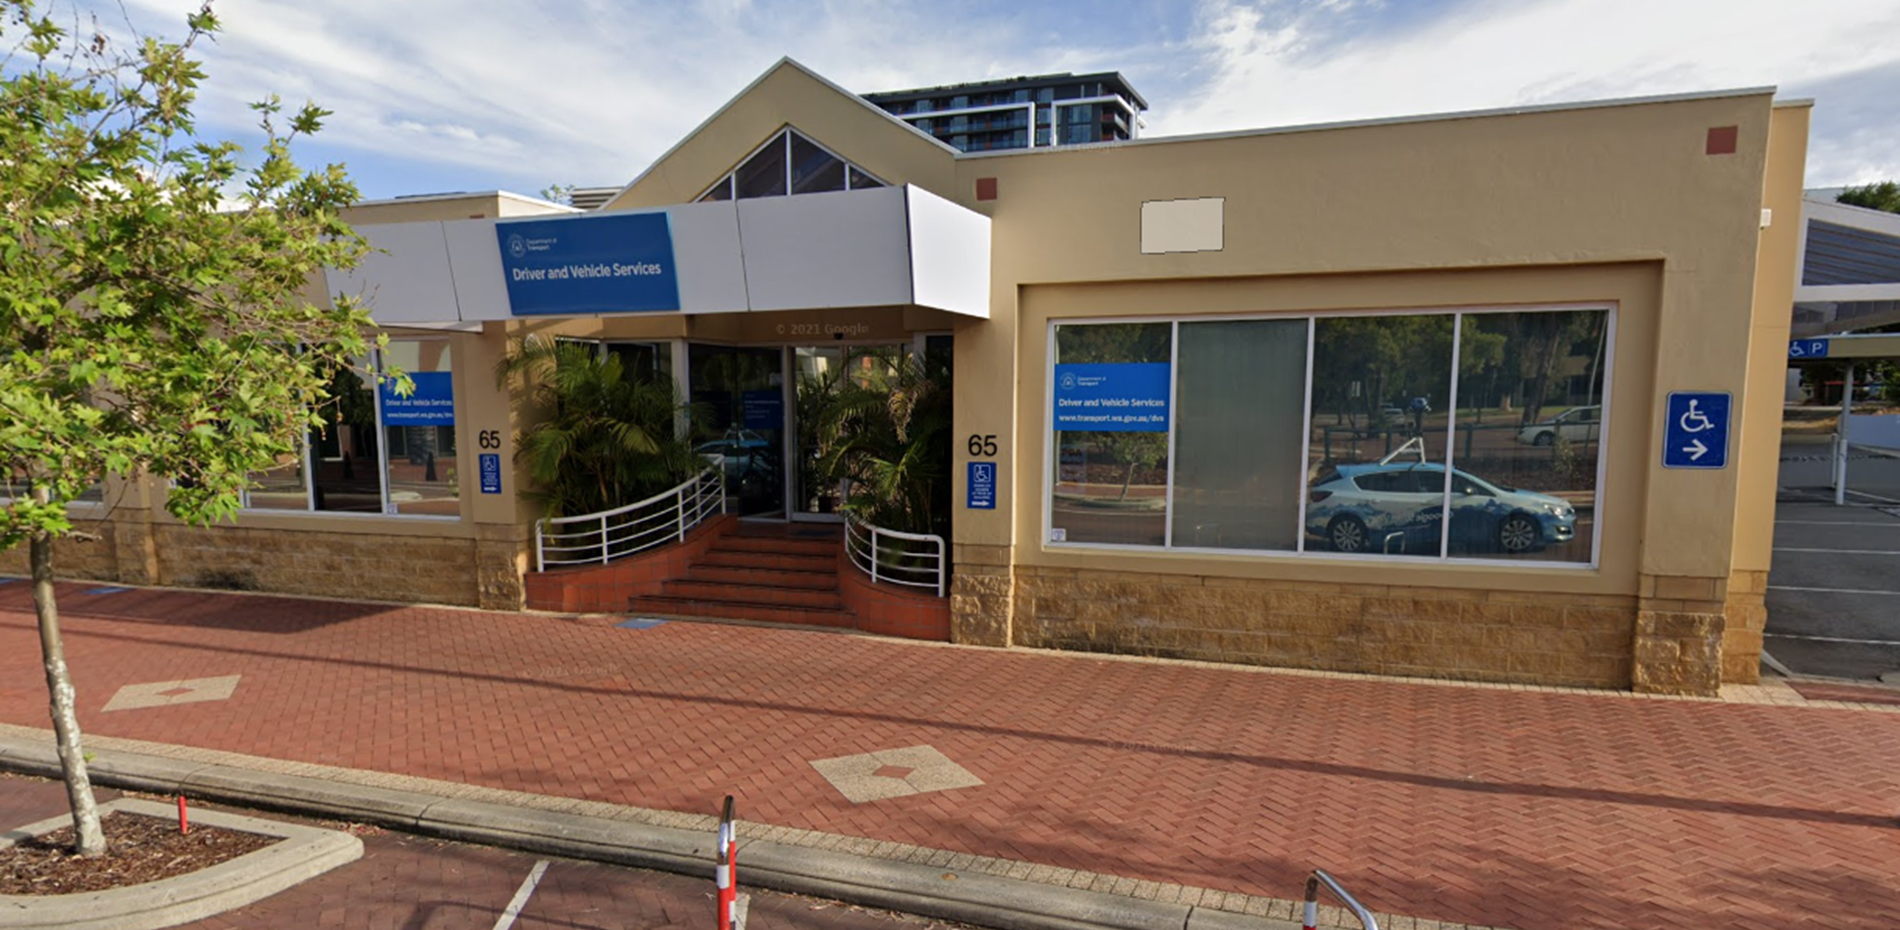 Community calls for Joondalup Licensing Centre to reopen: Labor Members Main Image